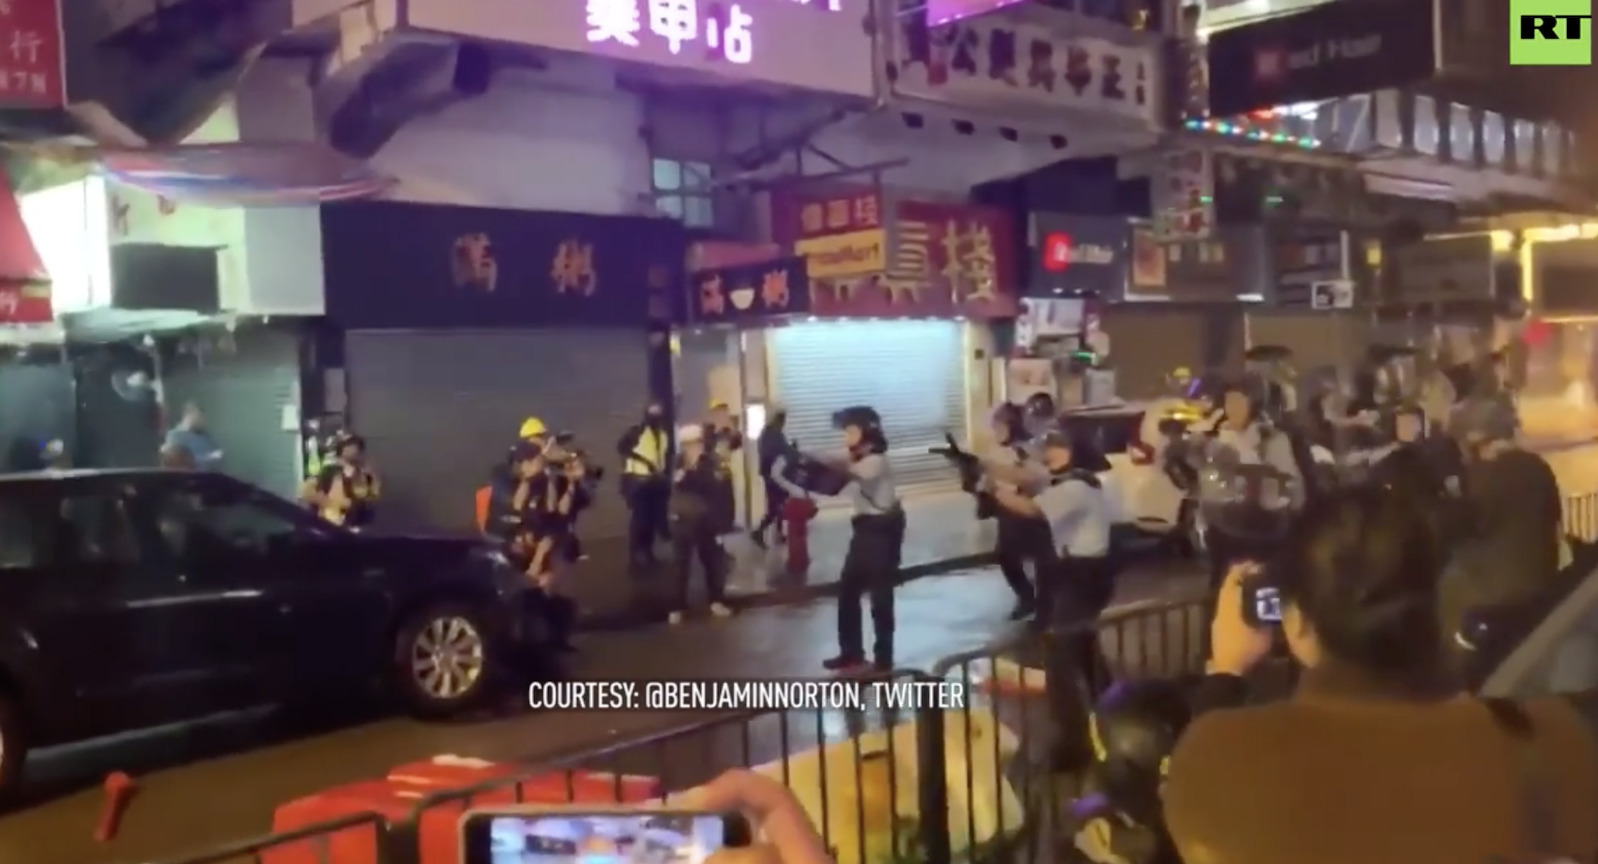 Hong Kong protestors go after police forcing them to draw guns!